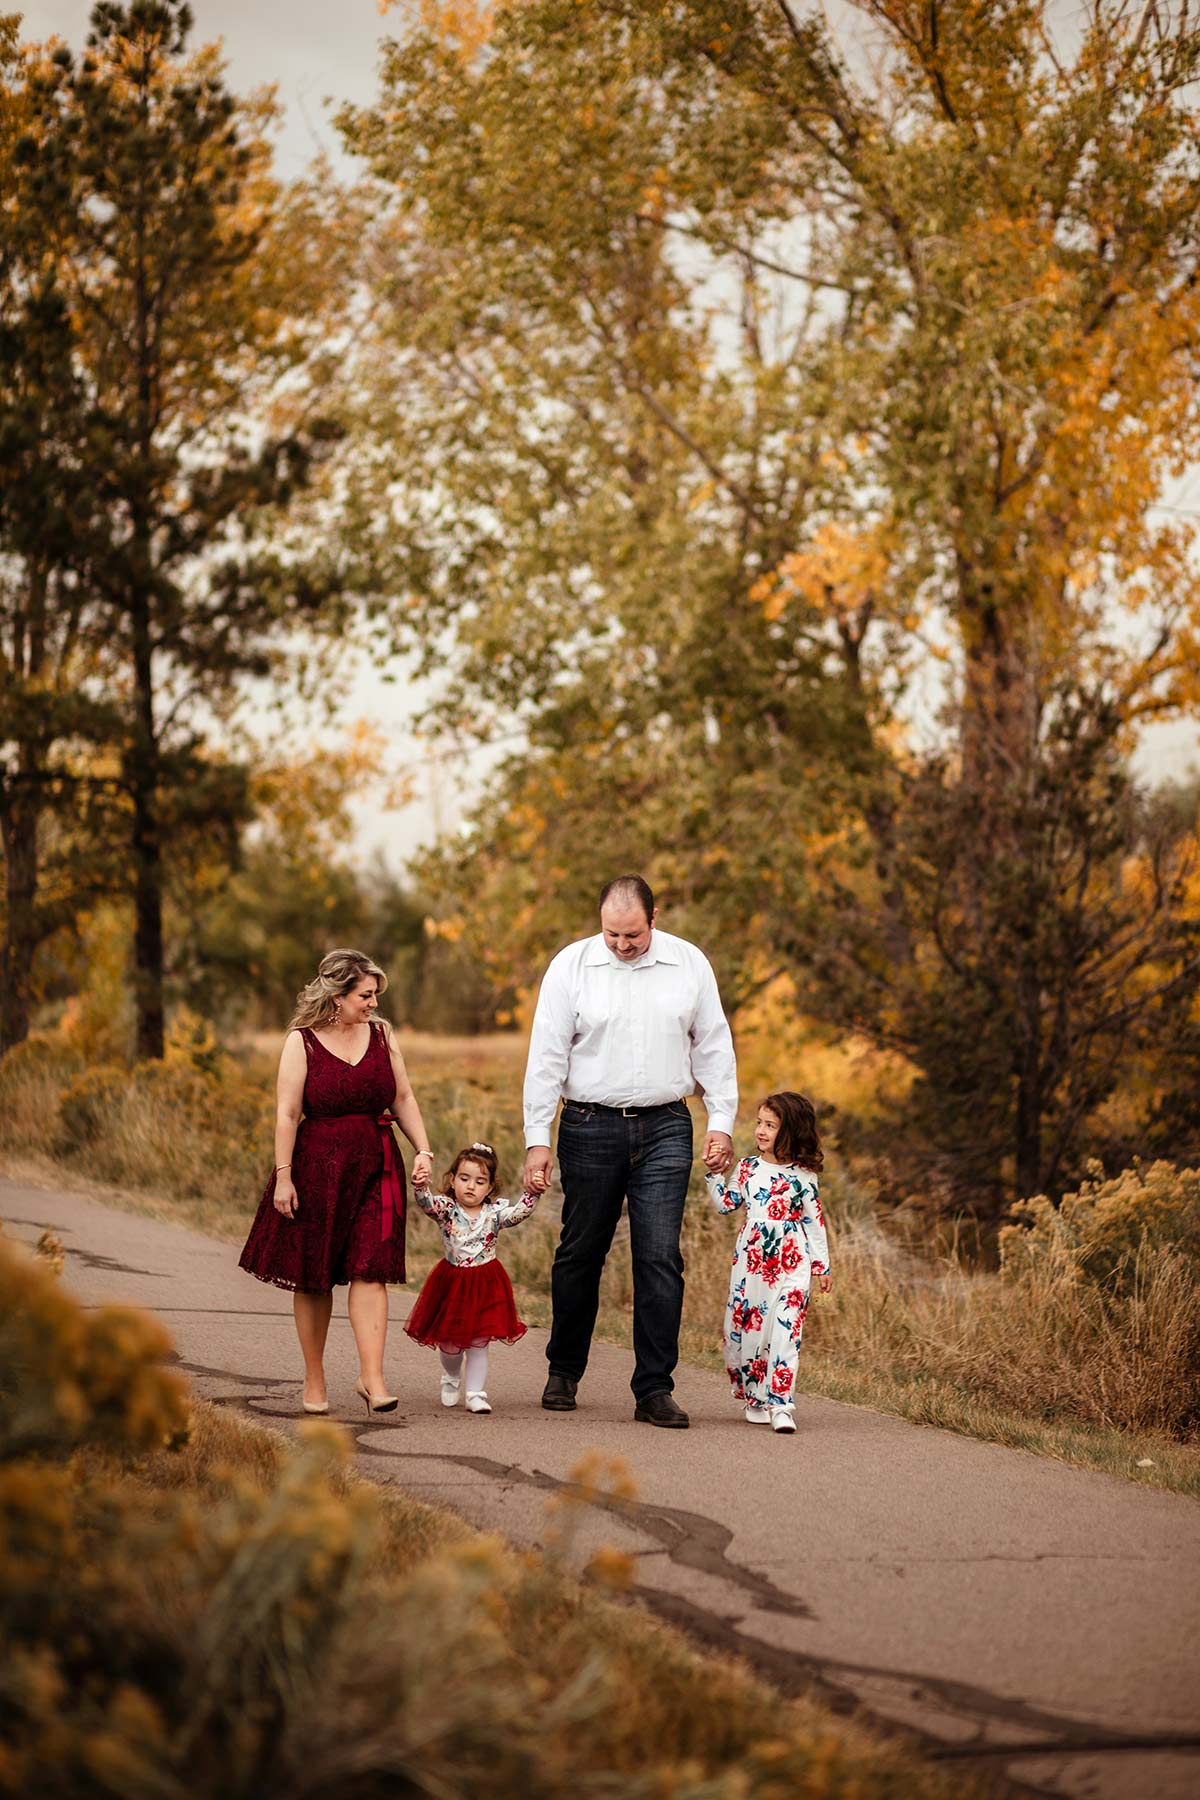 Fall family session in Denver, DTC area. Family fun photo experience